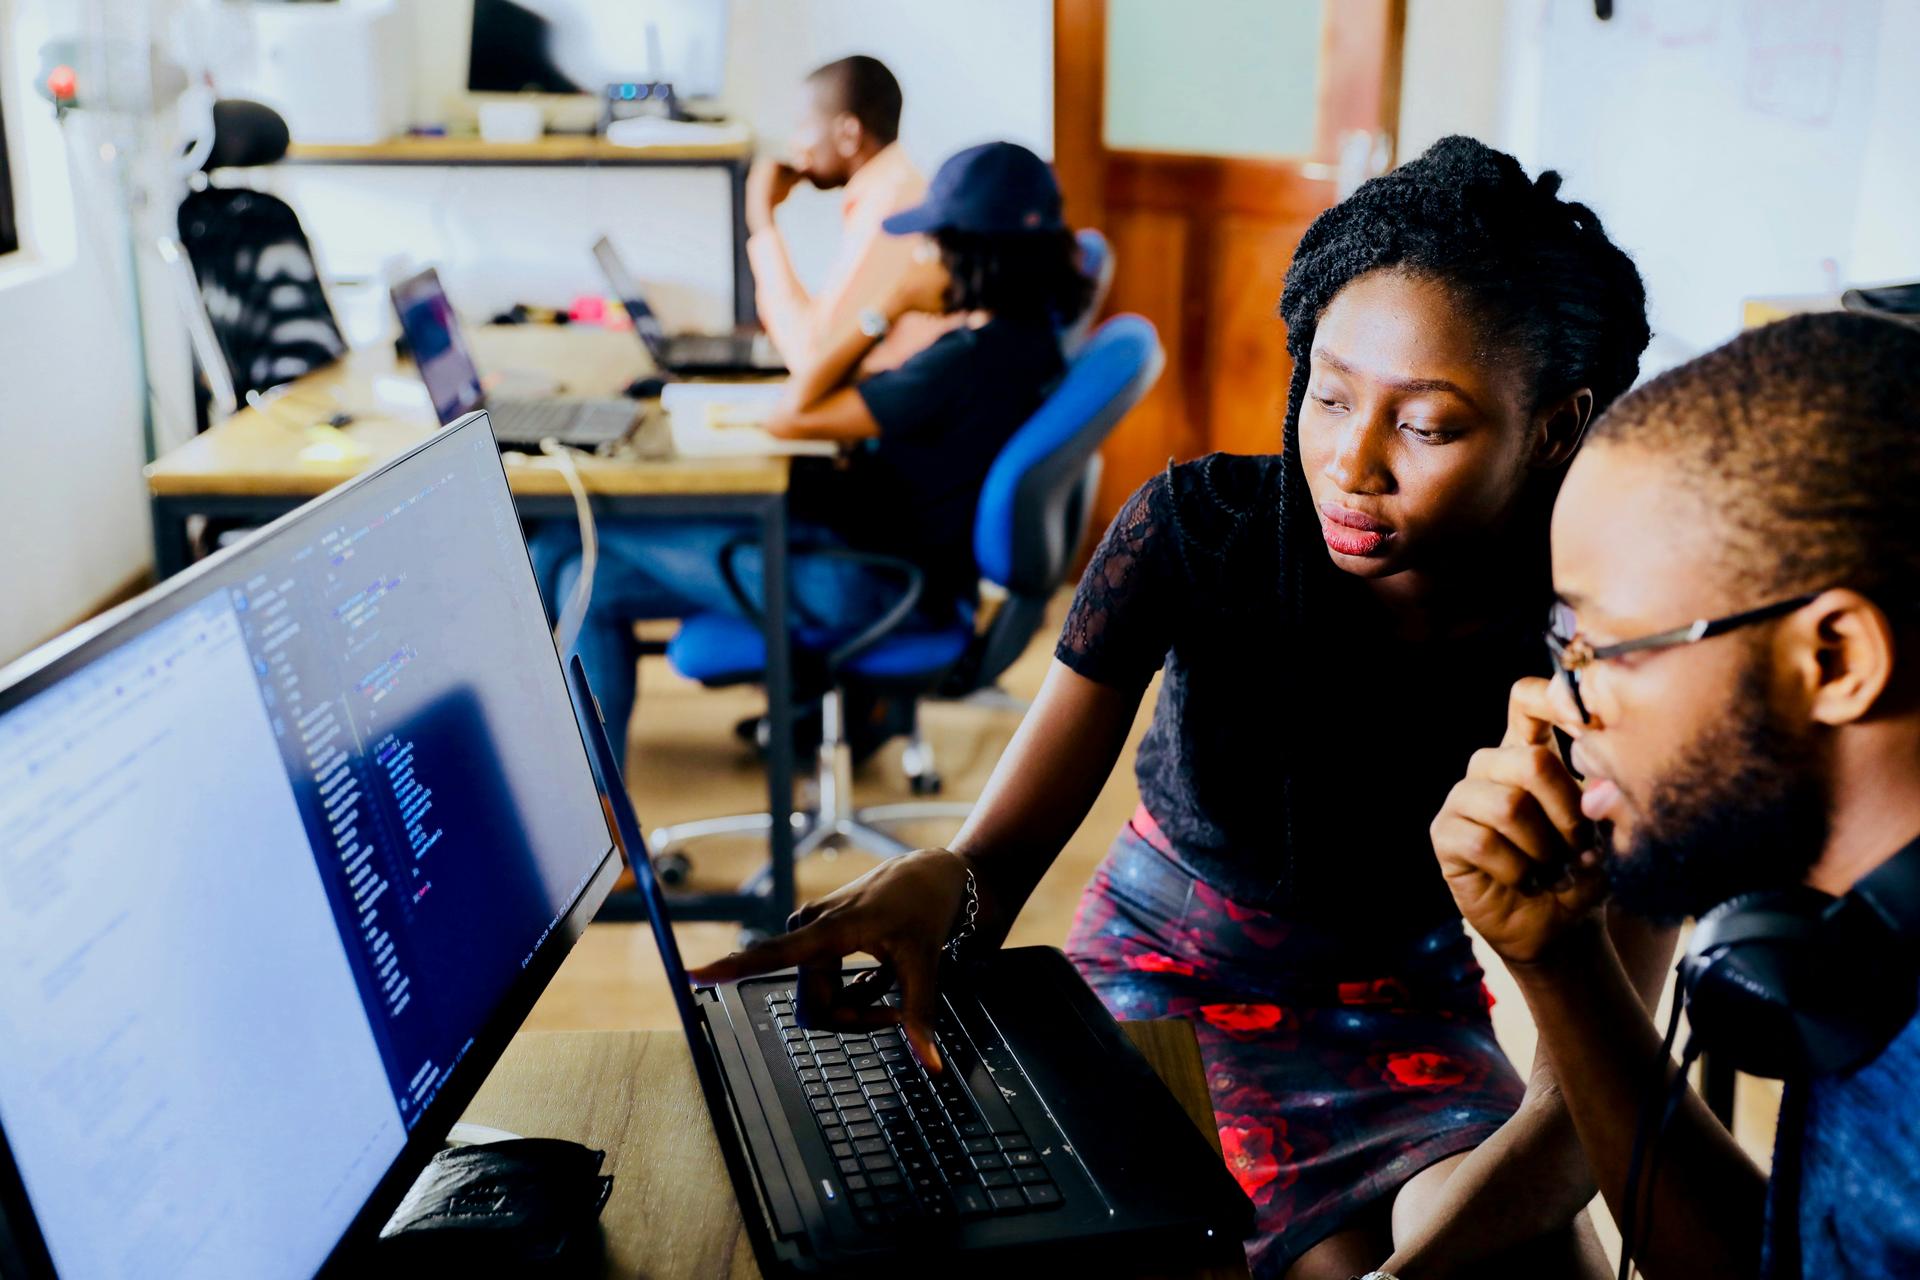 Women in tech and the imperative for Policy Action